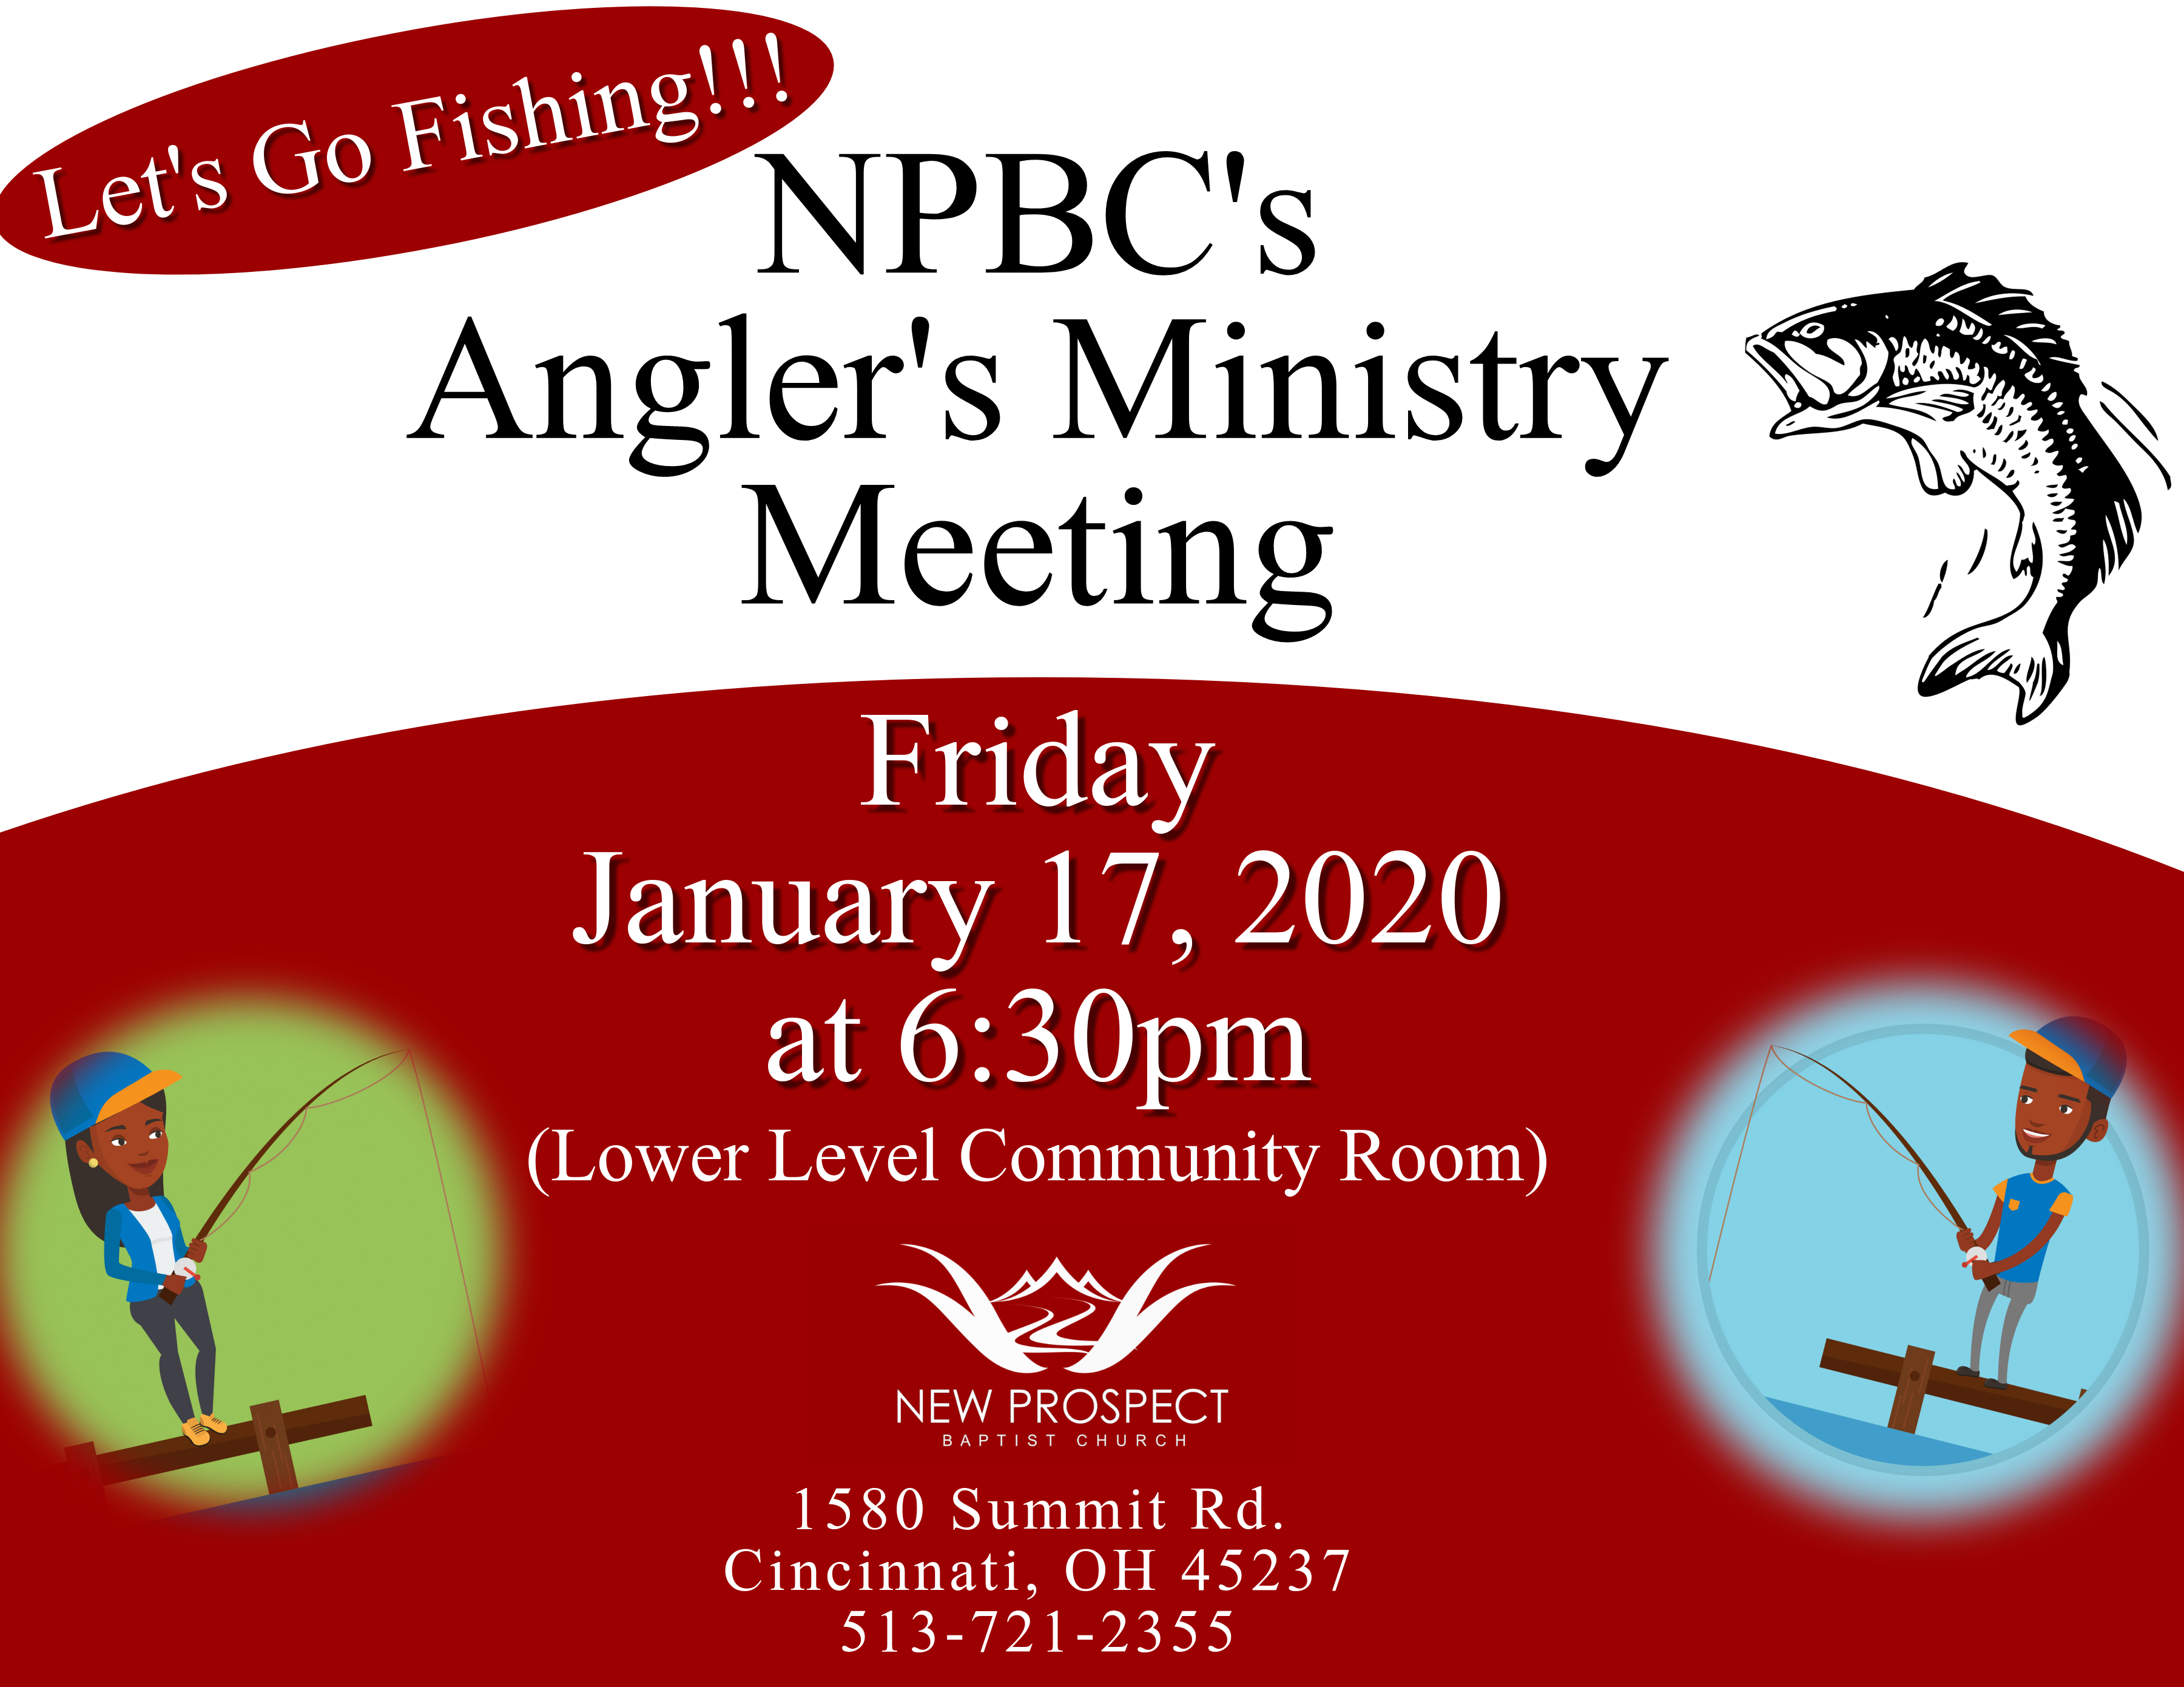 NPBC Anglers Ministry is having a meeting on Friday, January 17, 2020 at 6:30 p.m.